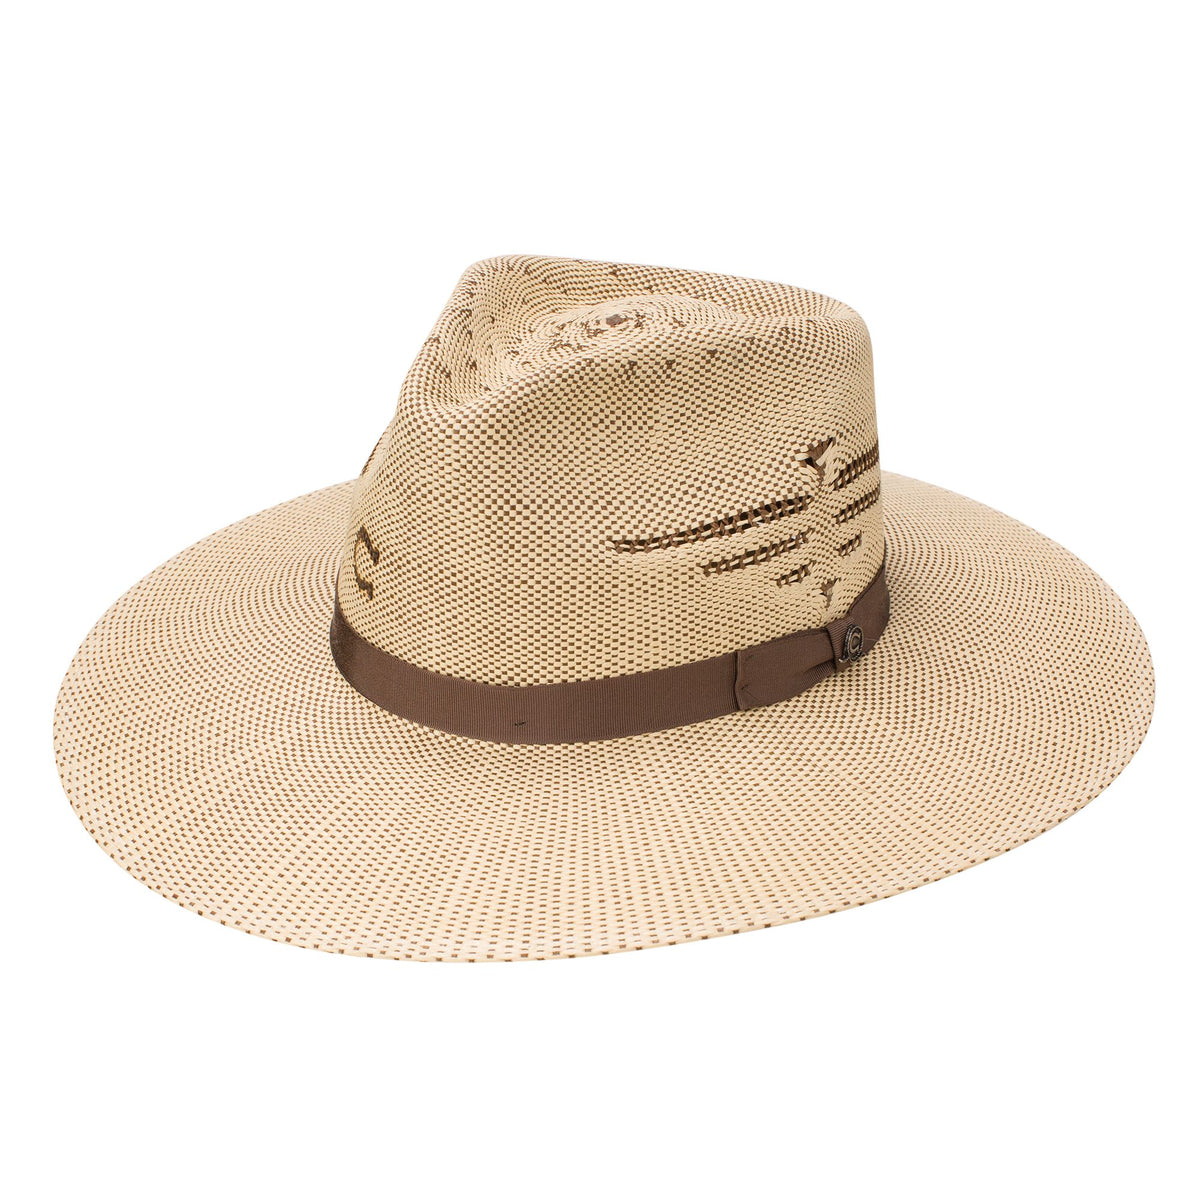 Charlie 1 Horse Mexico Shore Straw Hat #CSMXSH-3436 | High Country ...